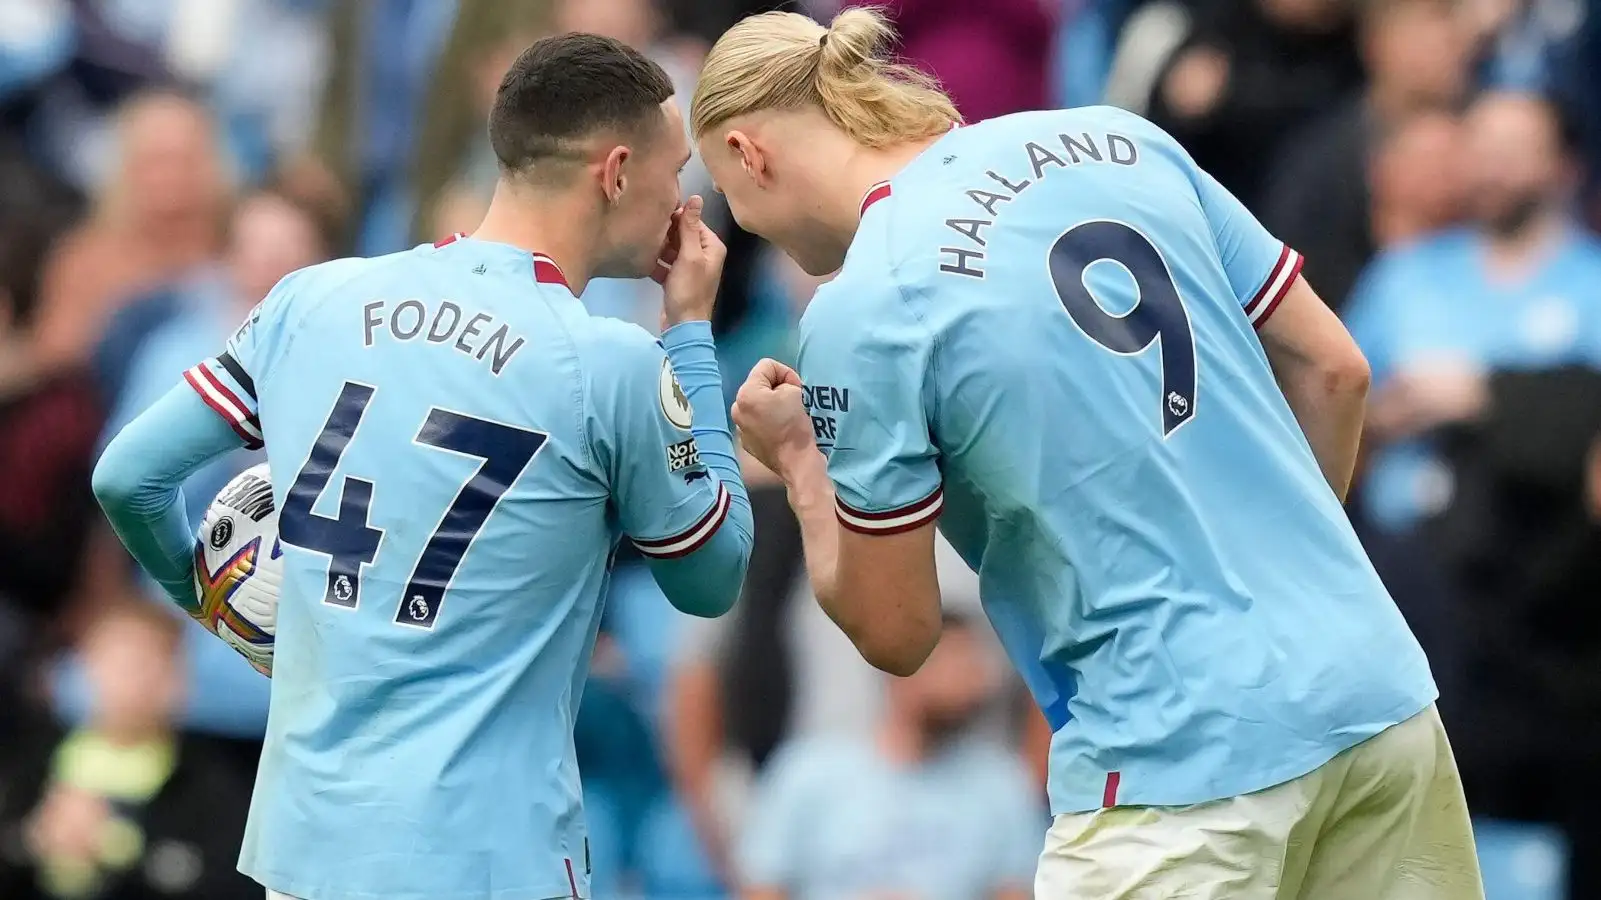 Manchester City stars Phil Foden and Erling Haaland chat after scoring hat-tricks against Manchester United.